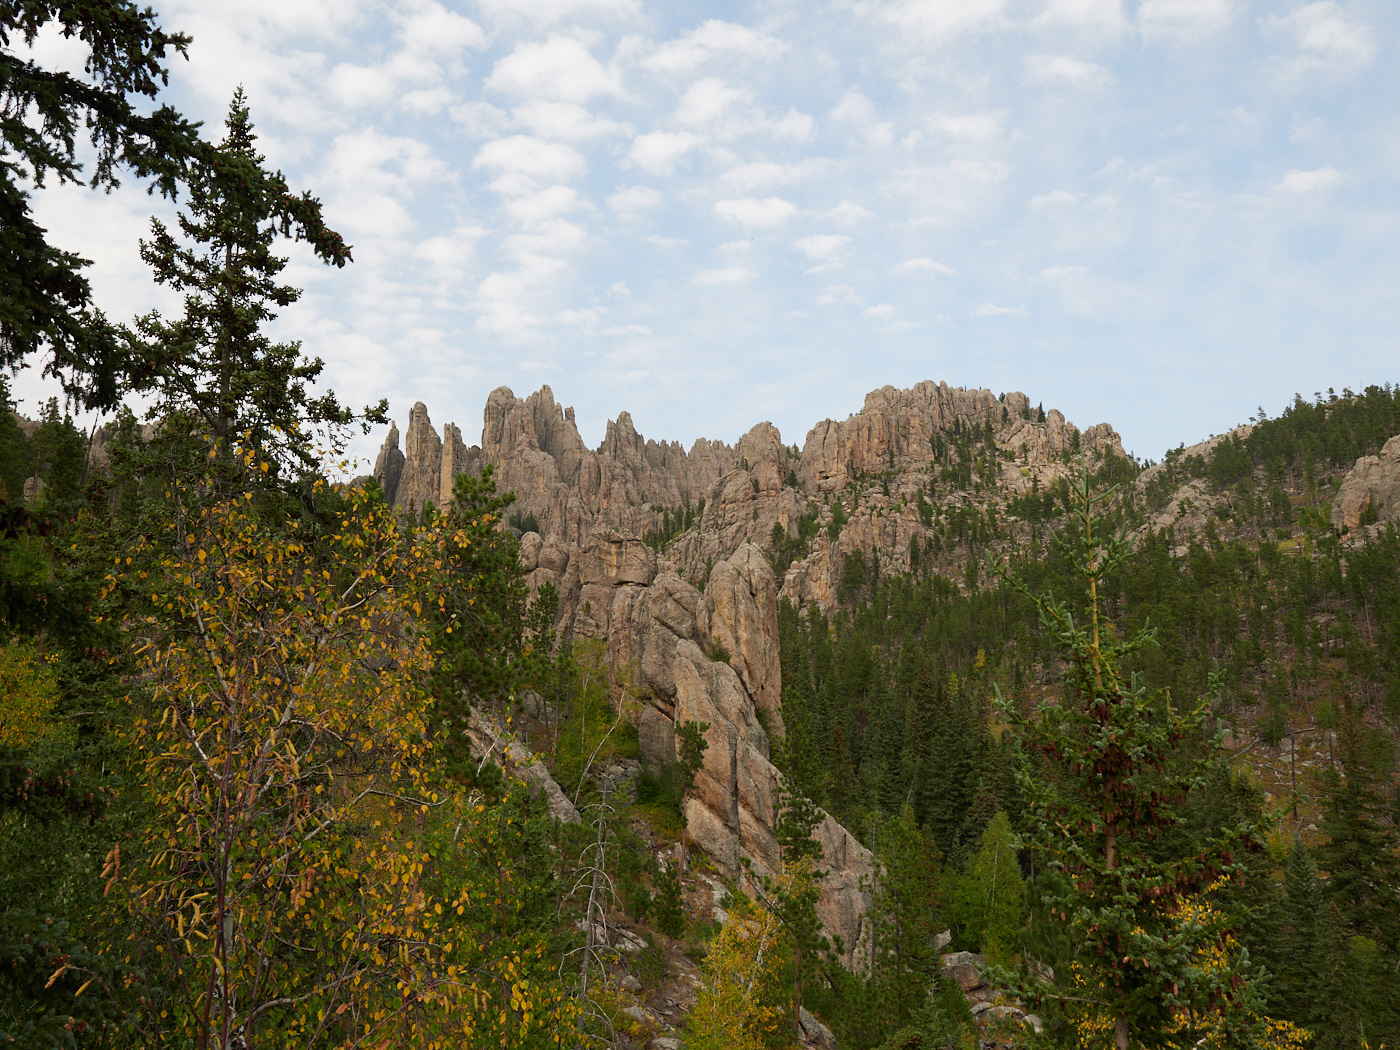 Custer State Park -- more of this follows.